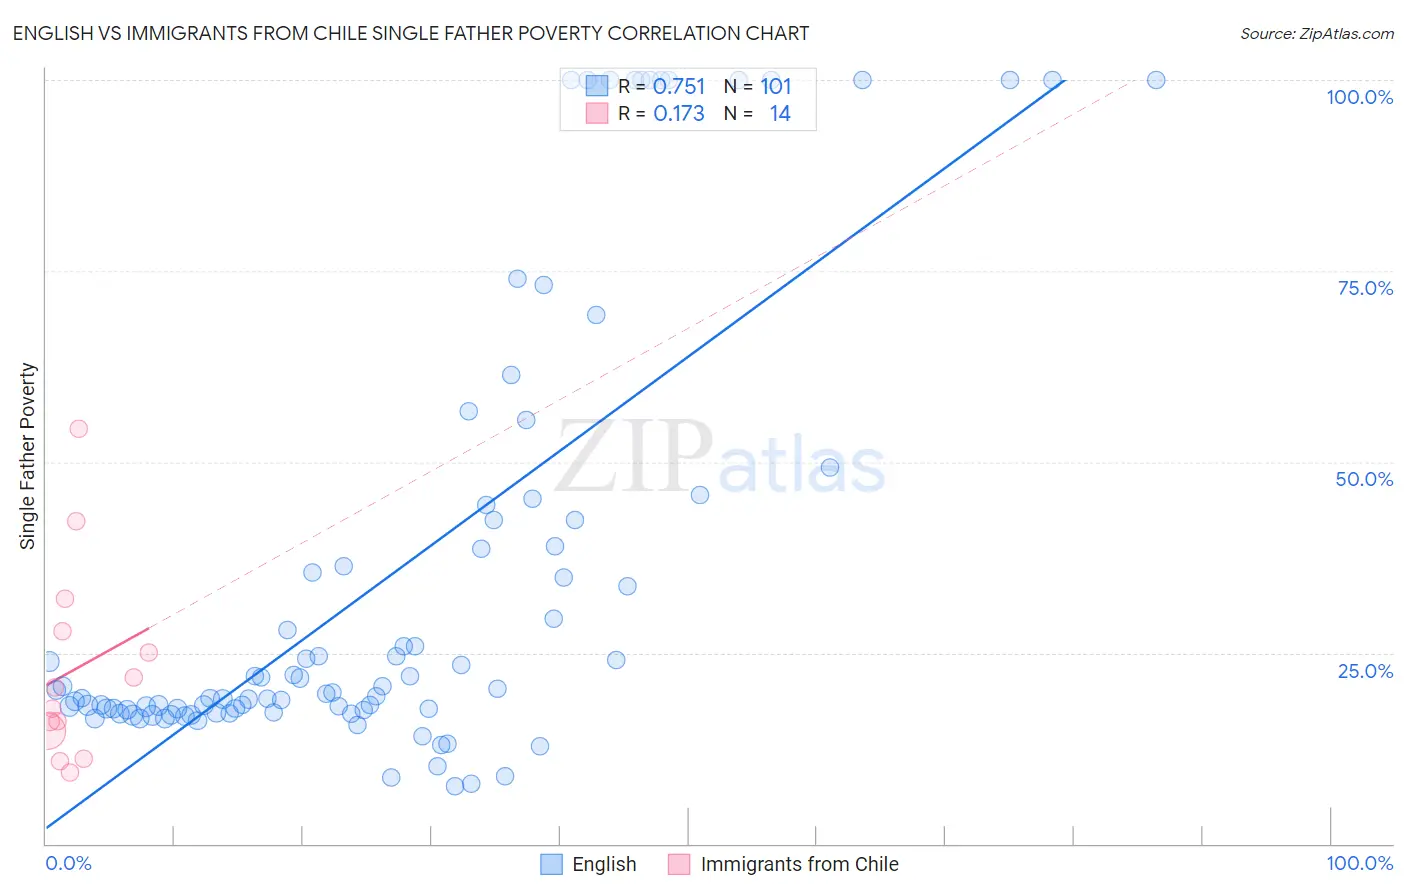 English vs Immigrants from Chile Single Father Poverty